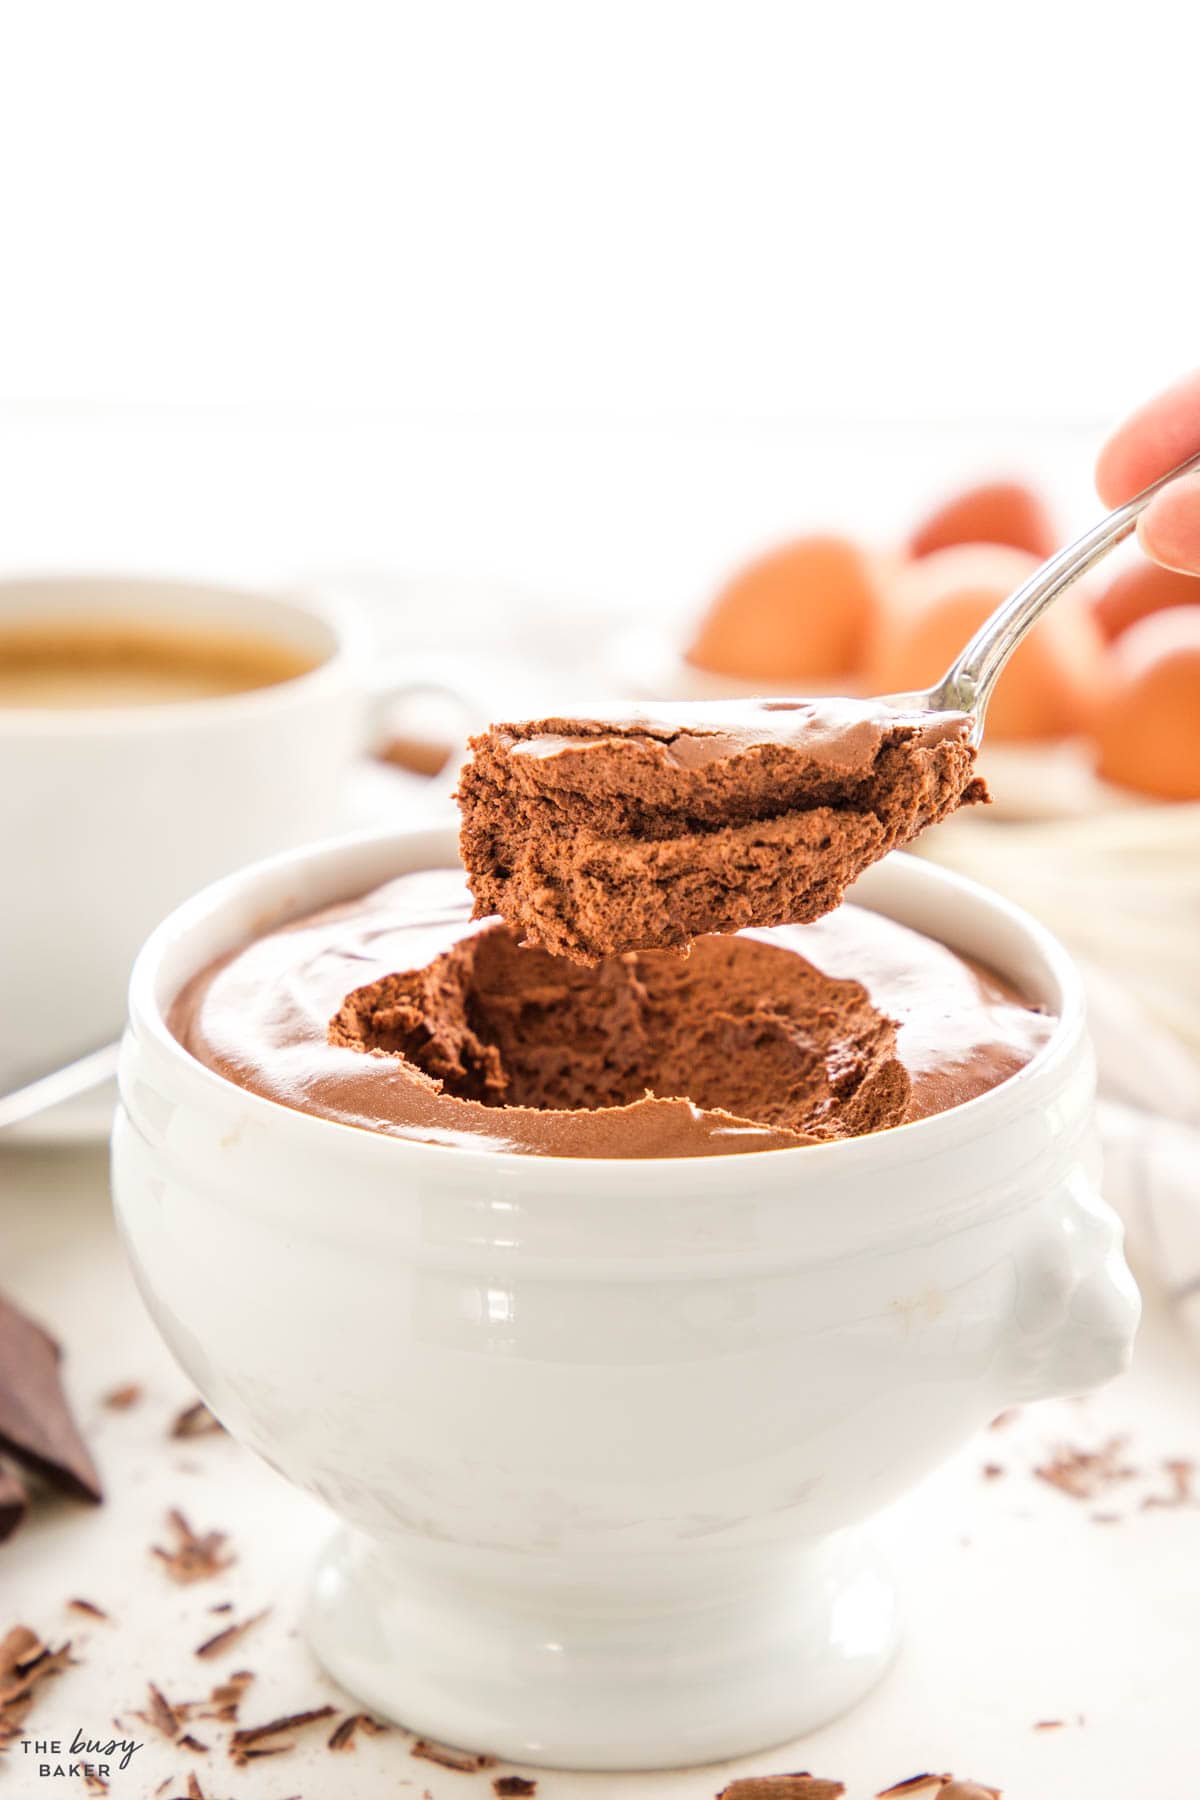 light, airy chocolate mousse recipe